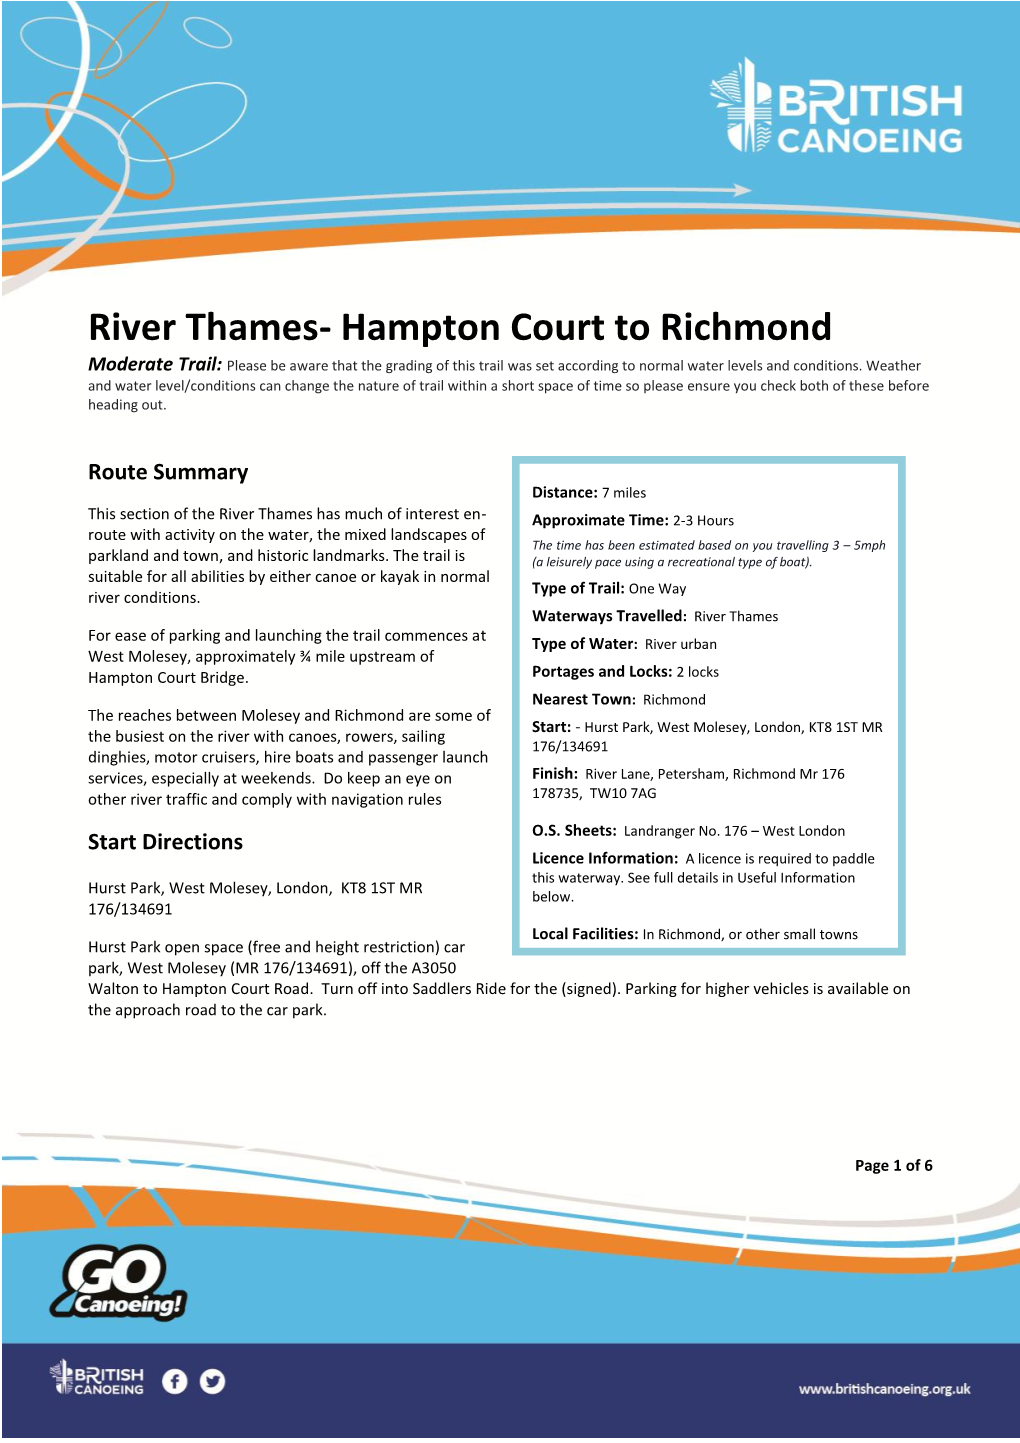 River Thames- Hampton Court to Richmond Moderate Trail: Please Be Aware That the Grading of This Trail Was Set According to Normal Water Levels and Conditions